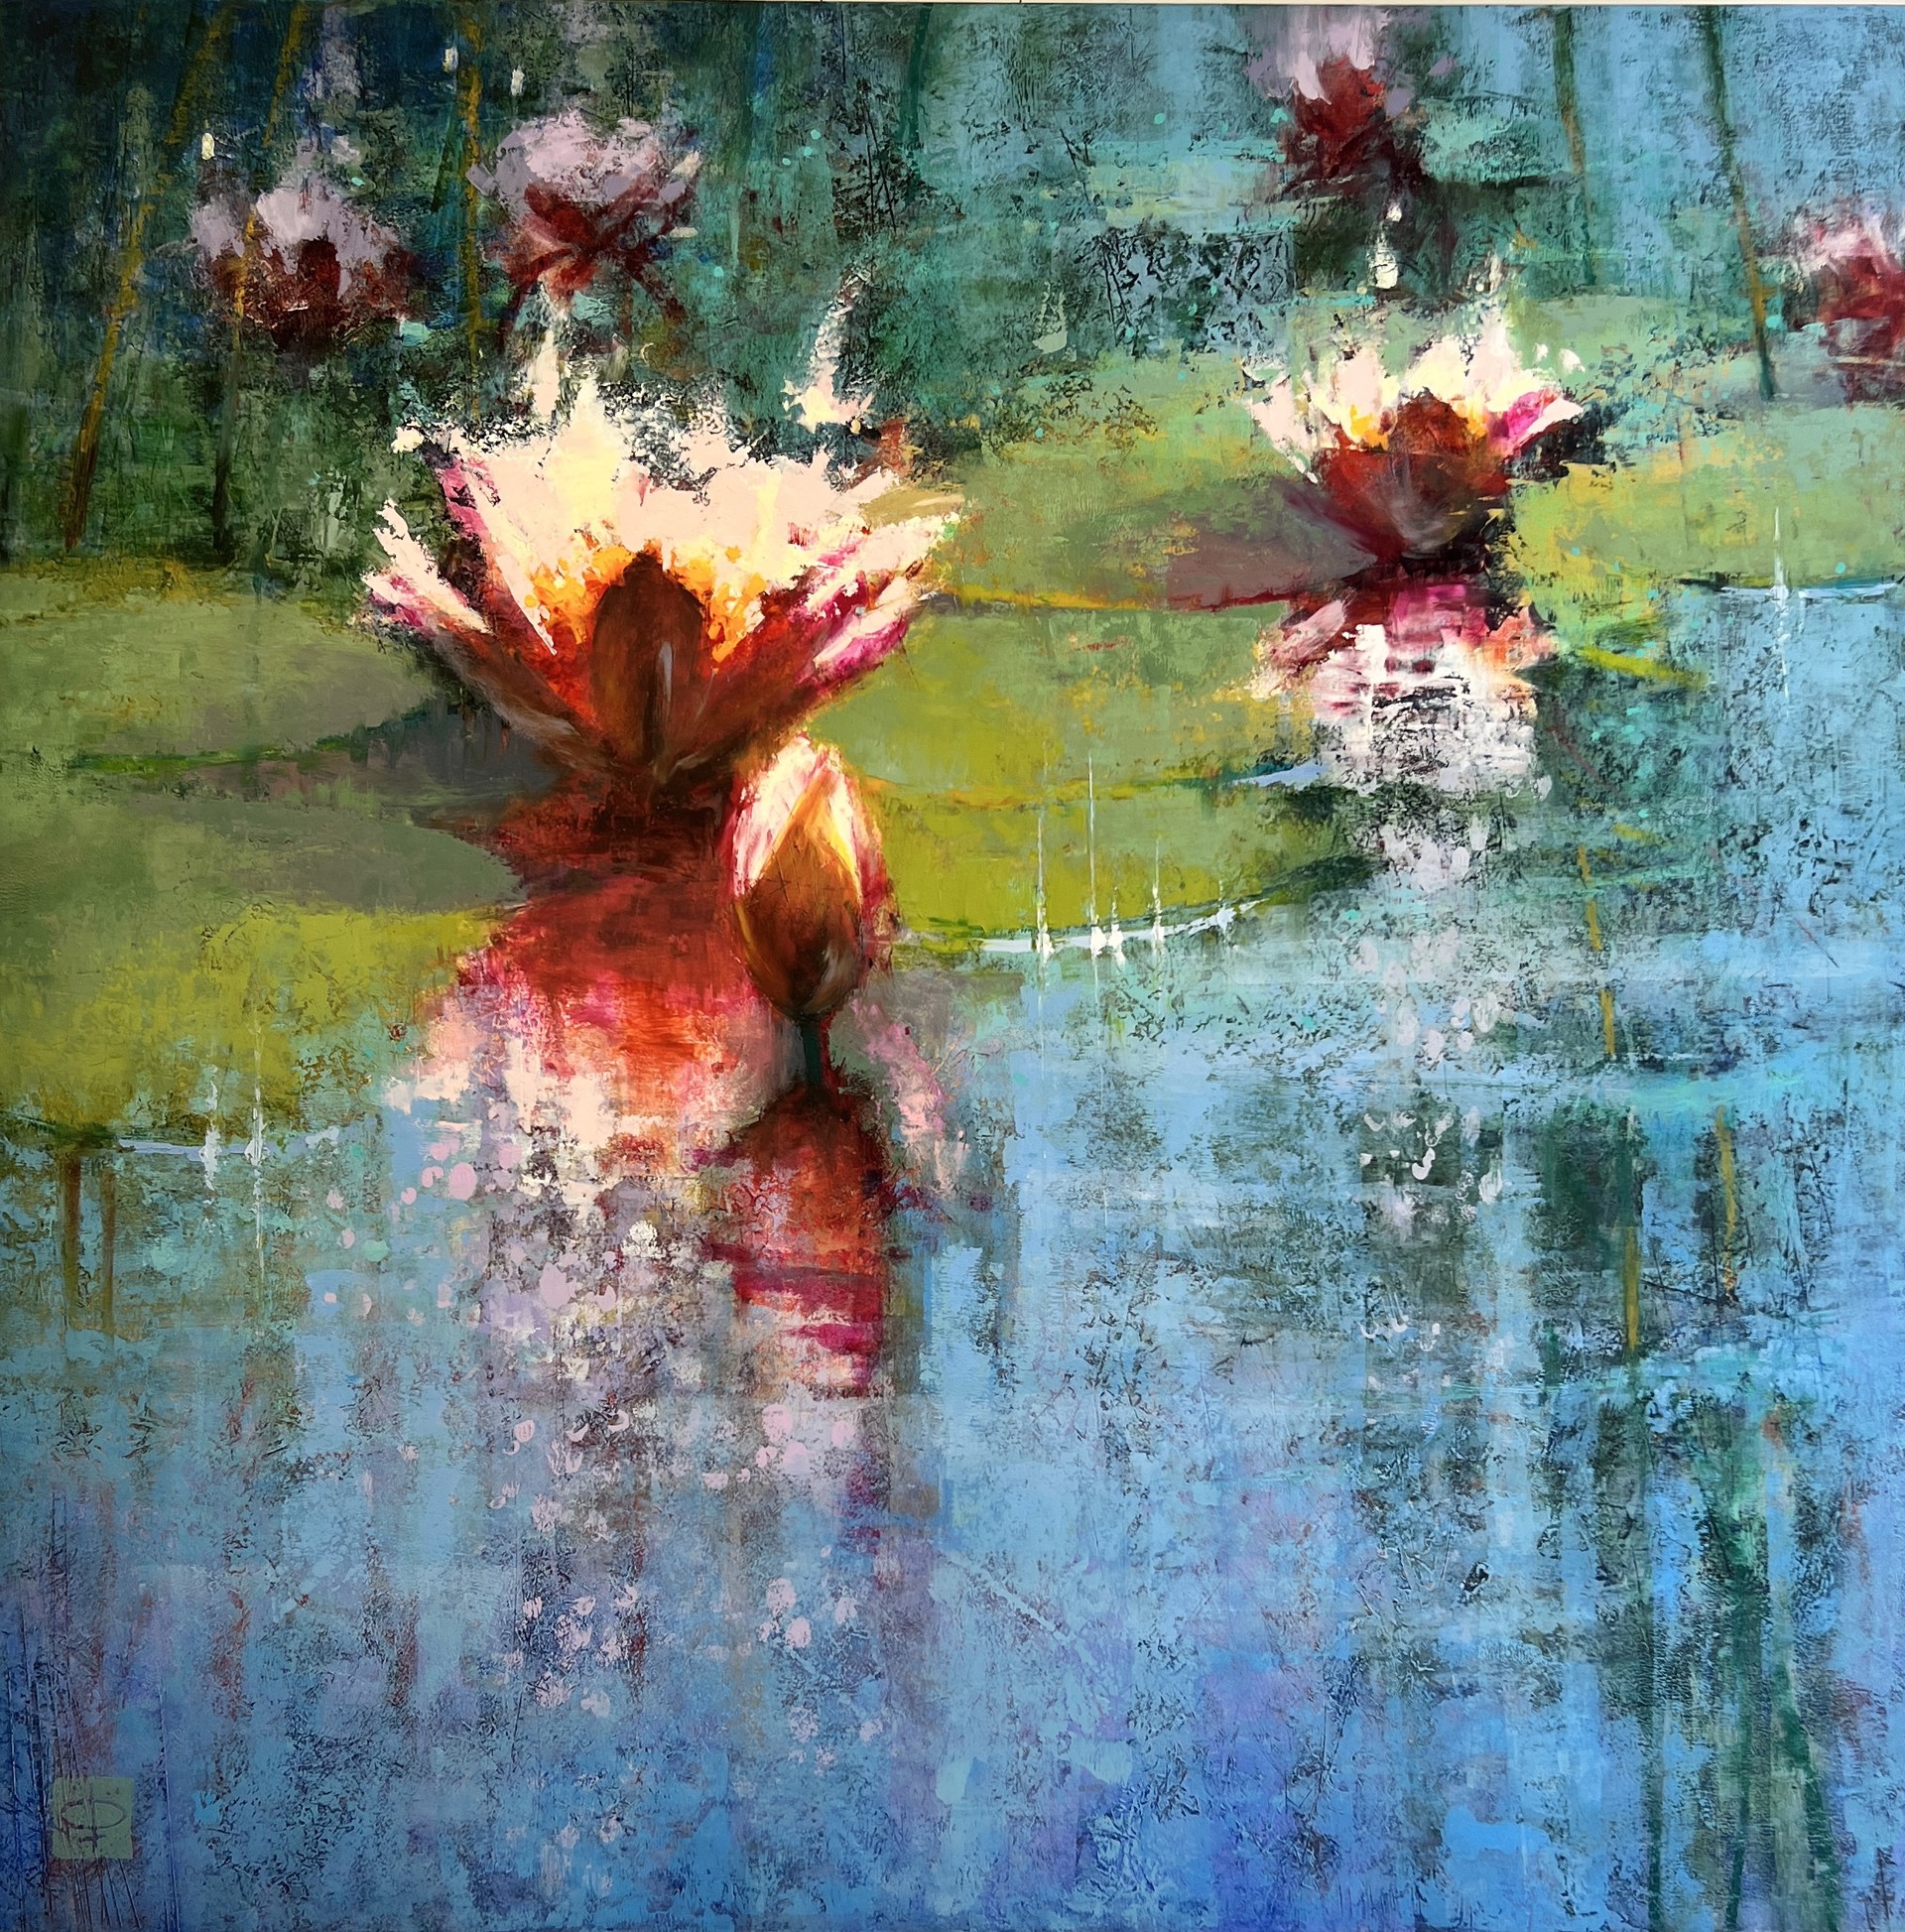 "Jewels of the Pond" original painting by Carole Boggemann Peirson